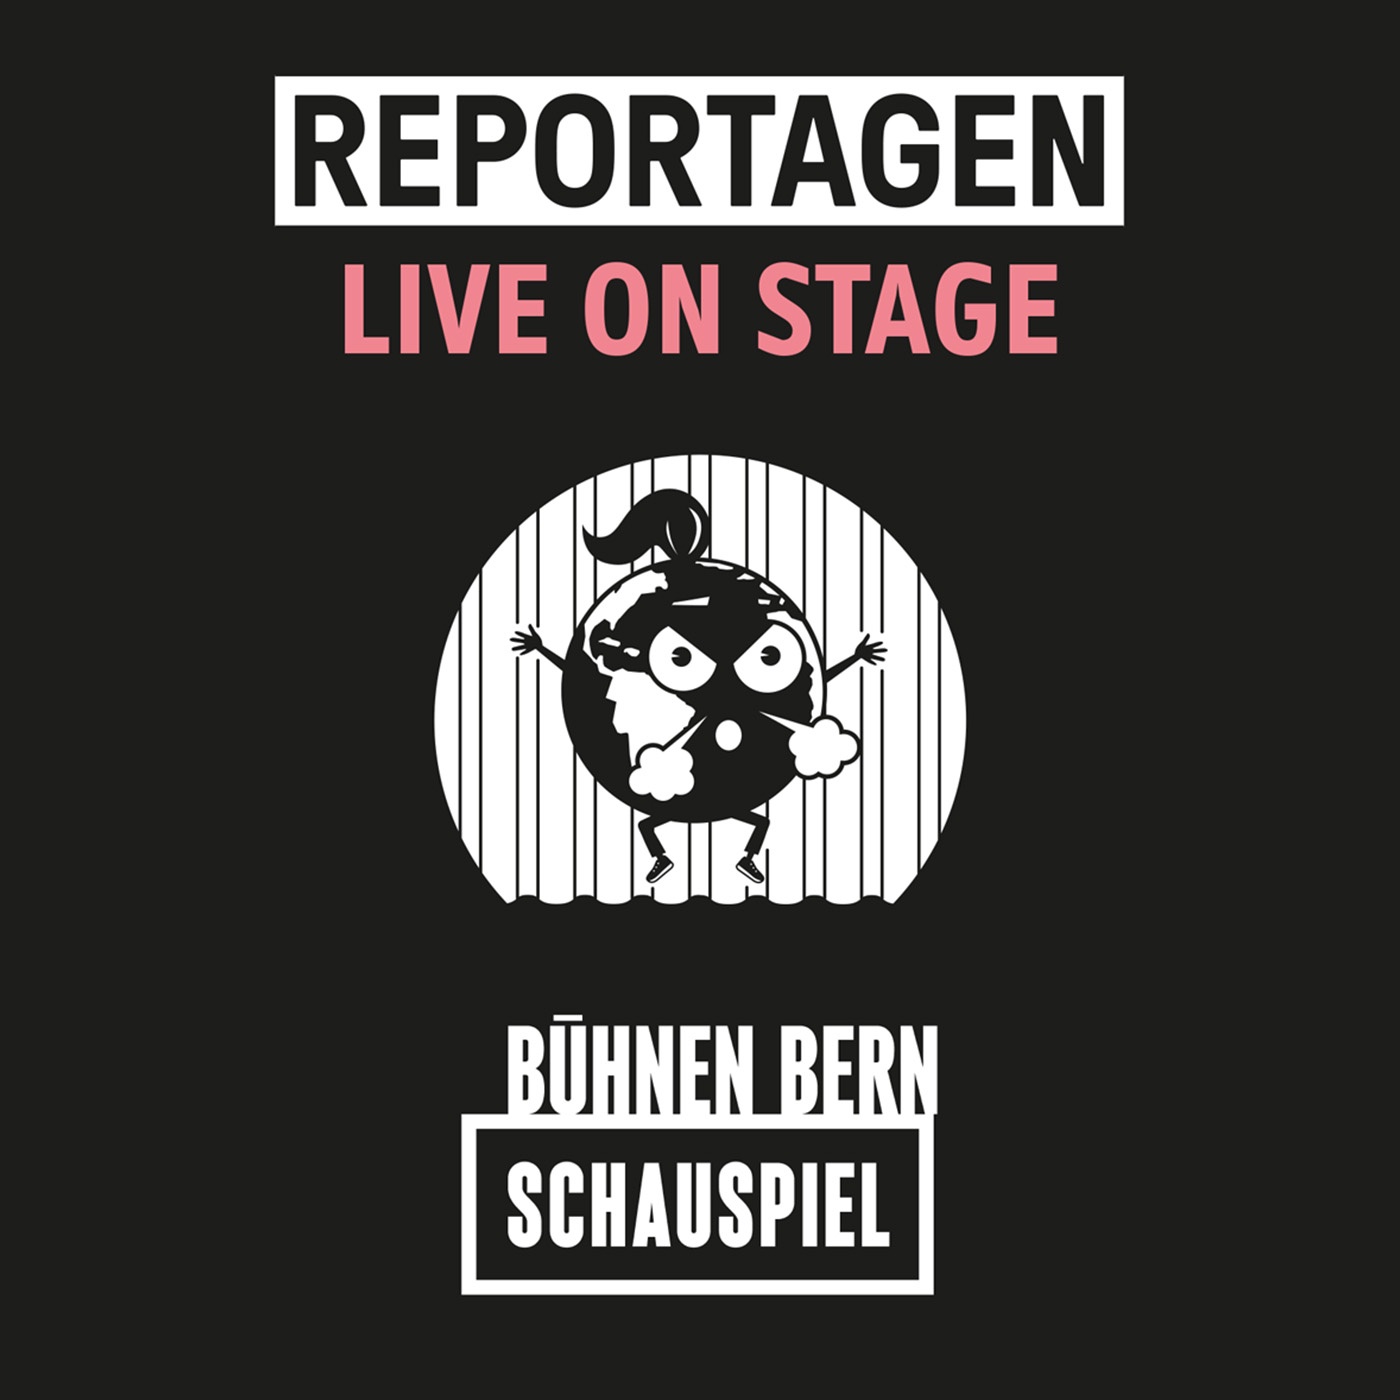 Reportagen Live on Stage